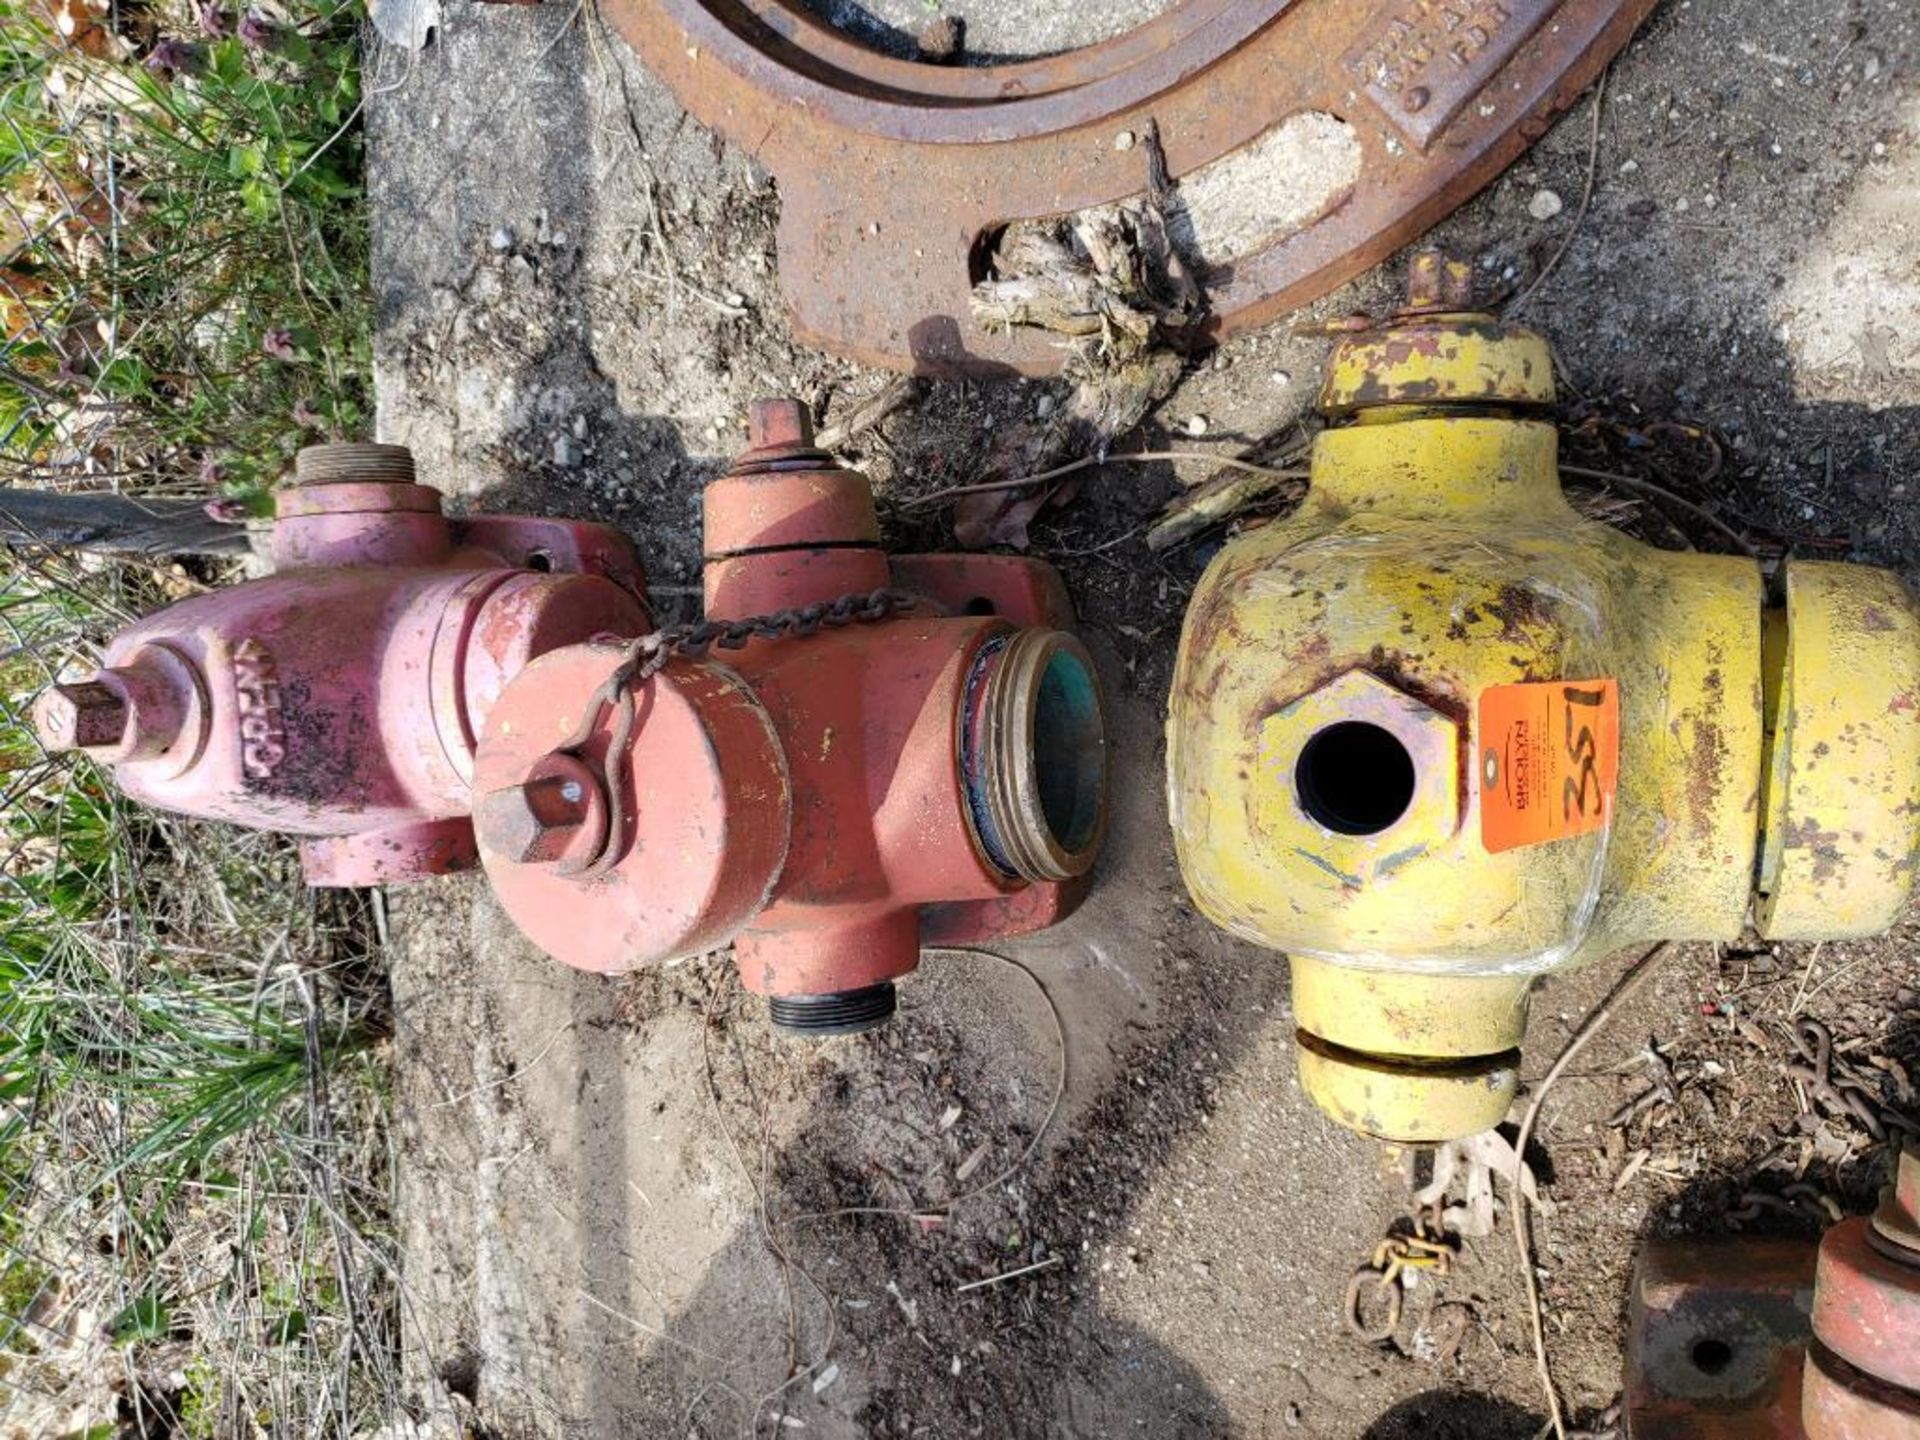 Qty 3 - Assorted fire hydrants.